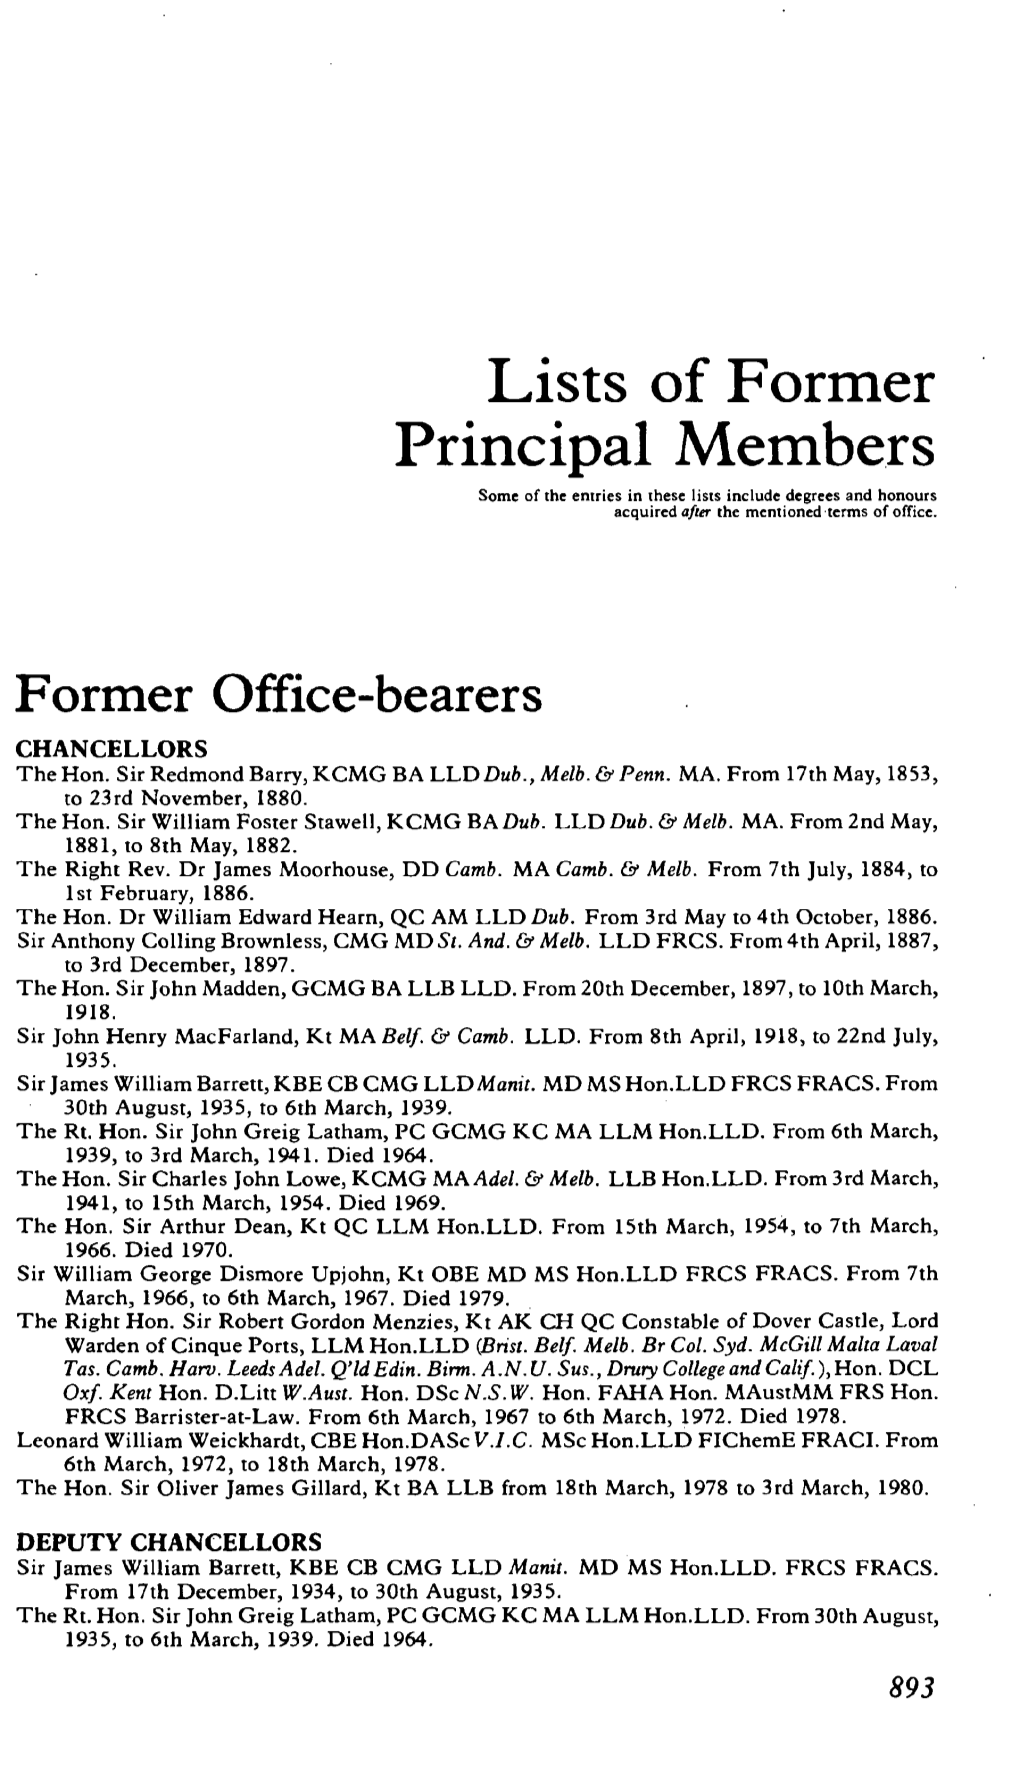 Lists of Former Principal Members Some of the Entries in These Lists Include Degrees and Honours Acquired After the Mentioned Terms of Office